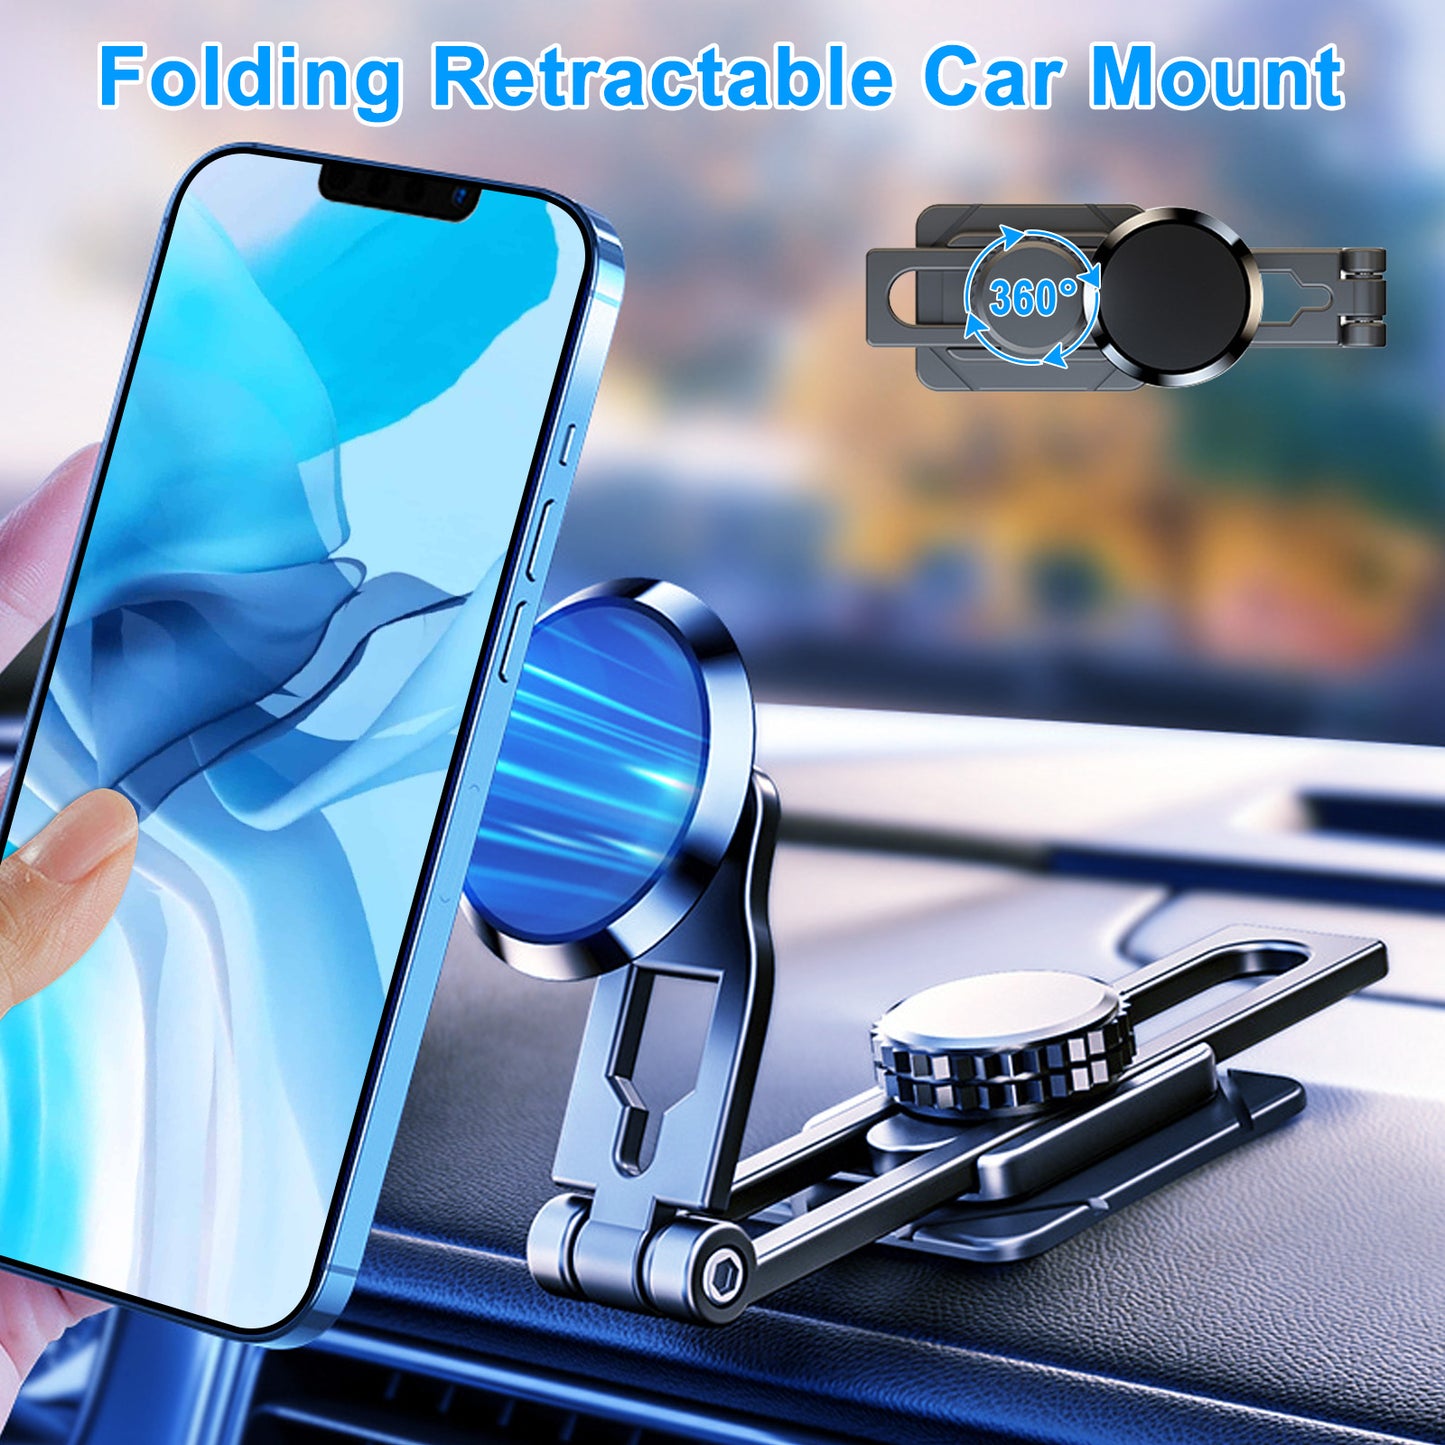 Magnetic Foldable Car Phone Holder - Smartphone Mobile Stand GPS Air Vent Mount Magnet CellPhone Stand Portable Phone Holder (Black)